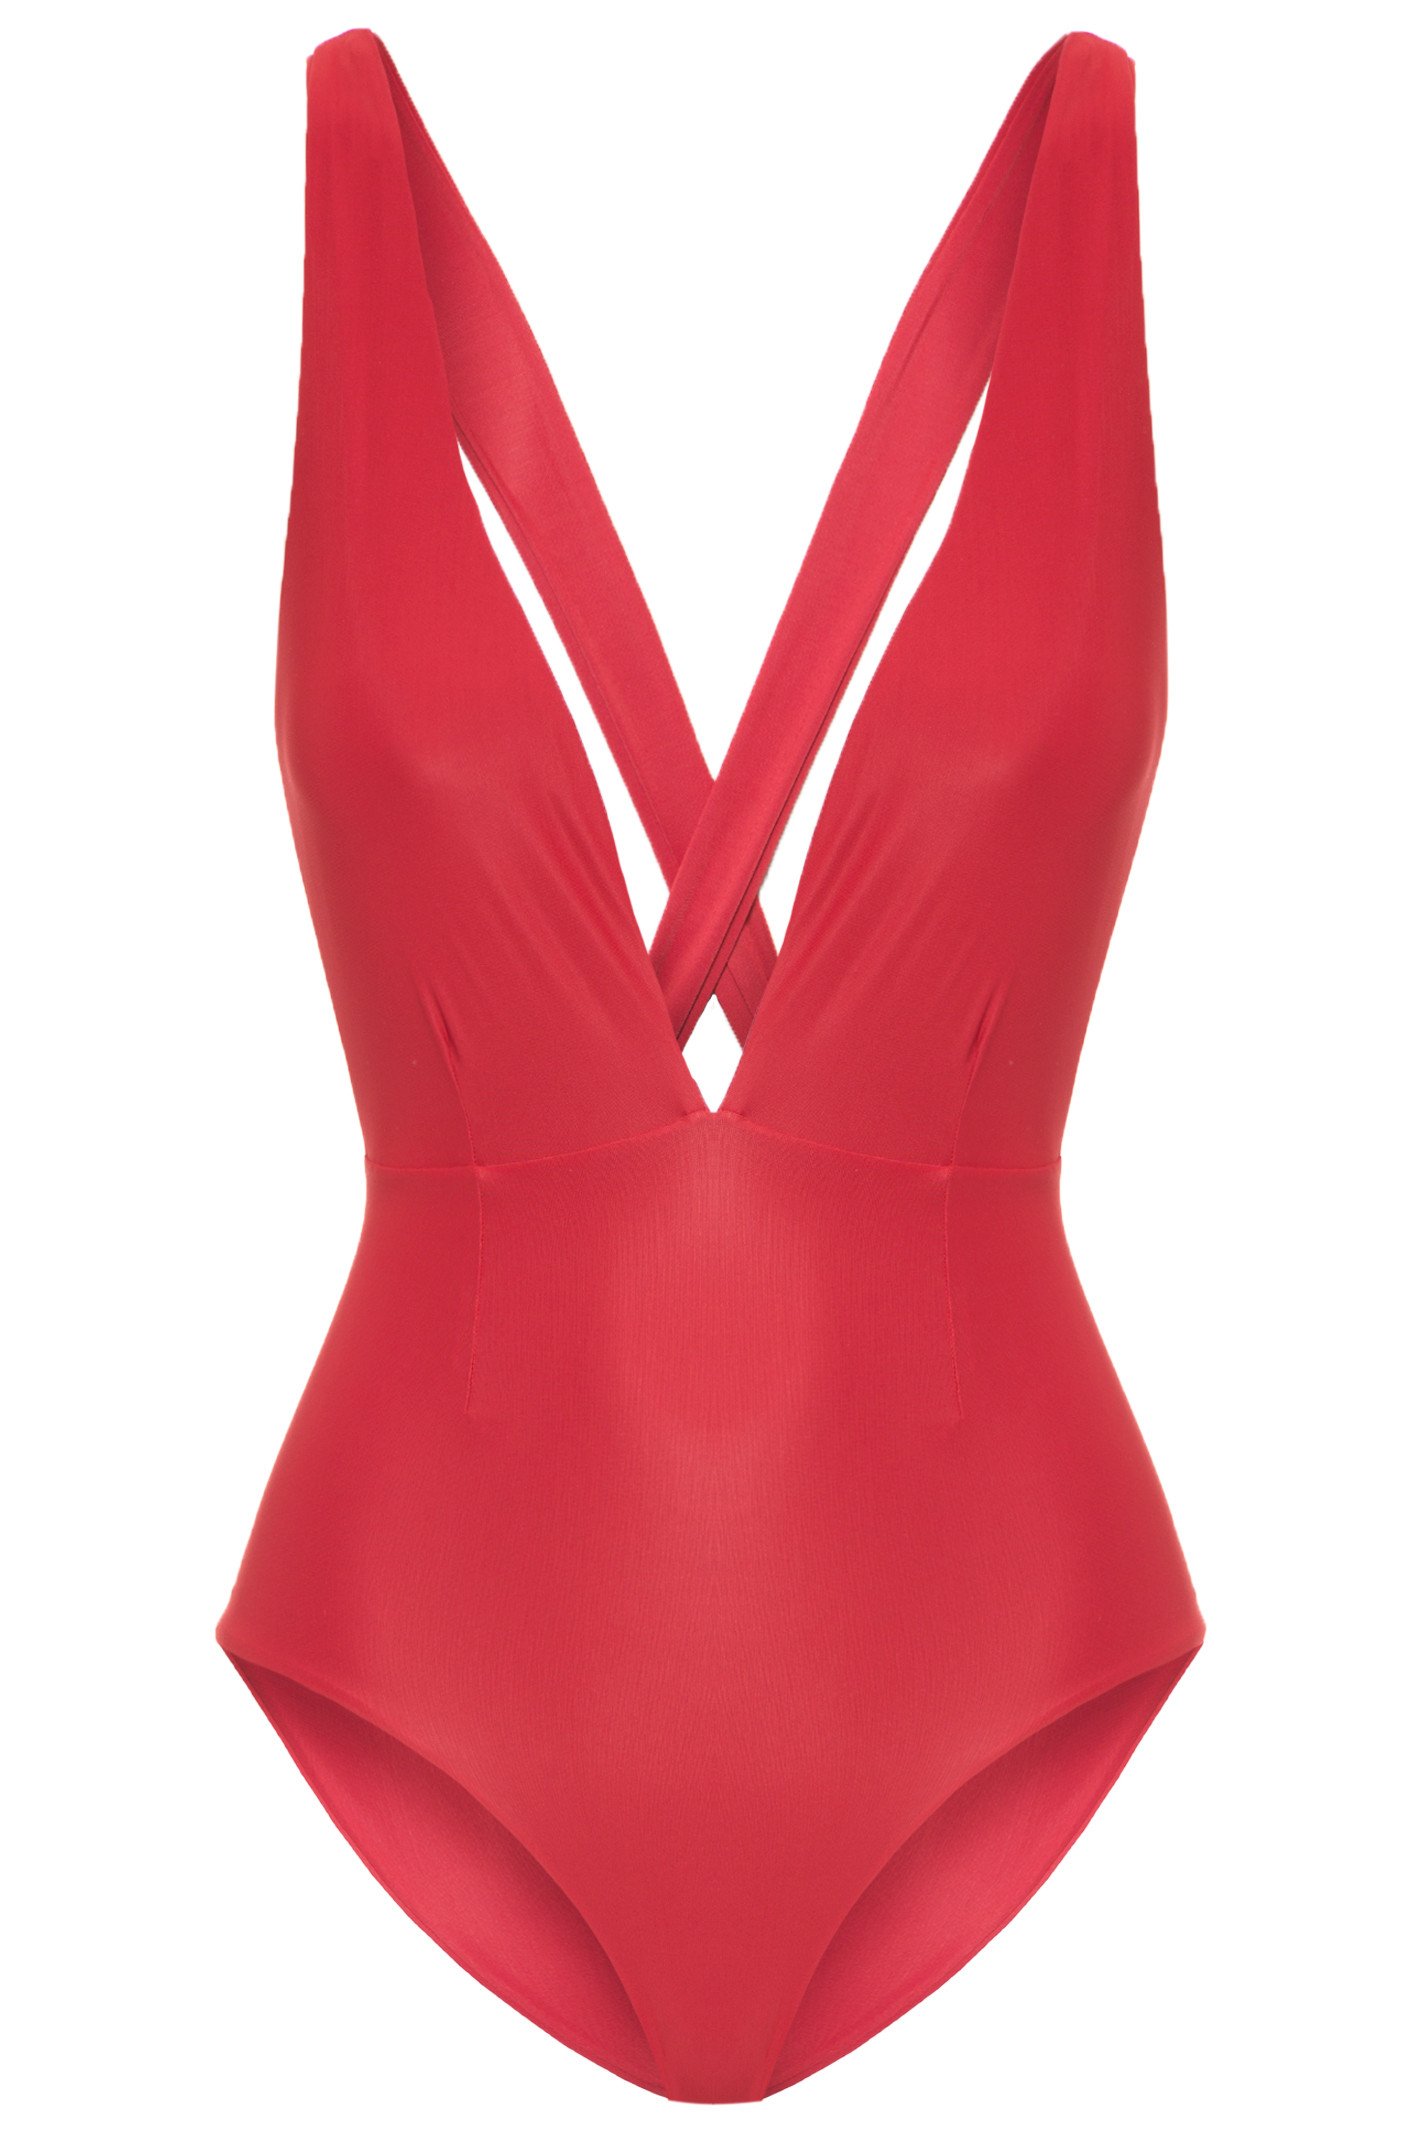 Red One-piece V-neck Swimsuit With Multi-way Straps - Marina Maillot ...